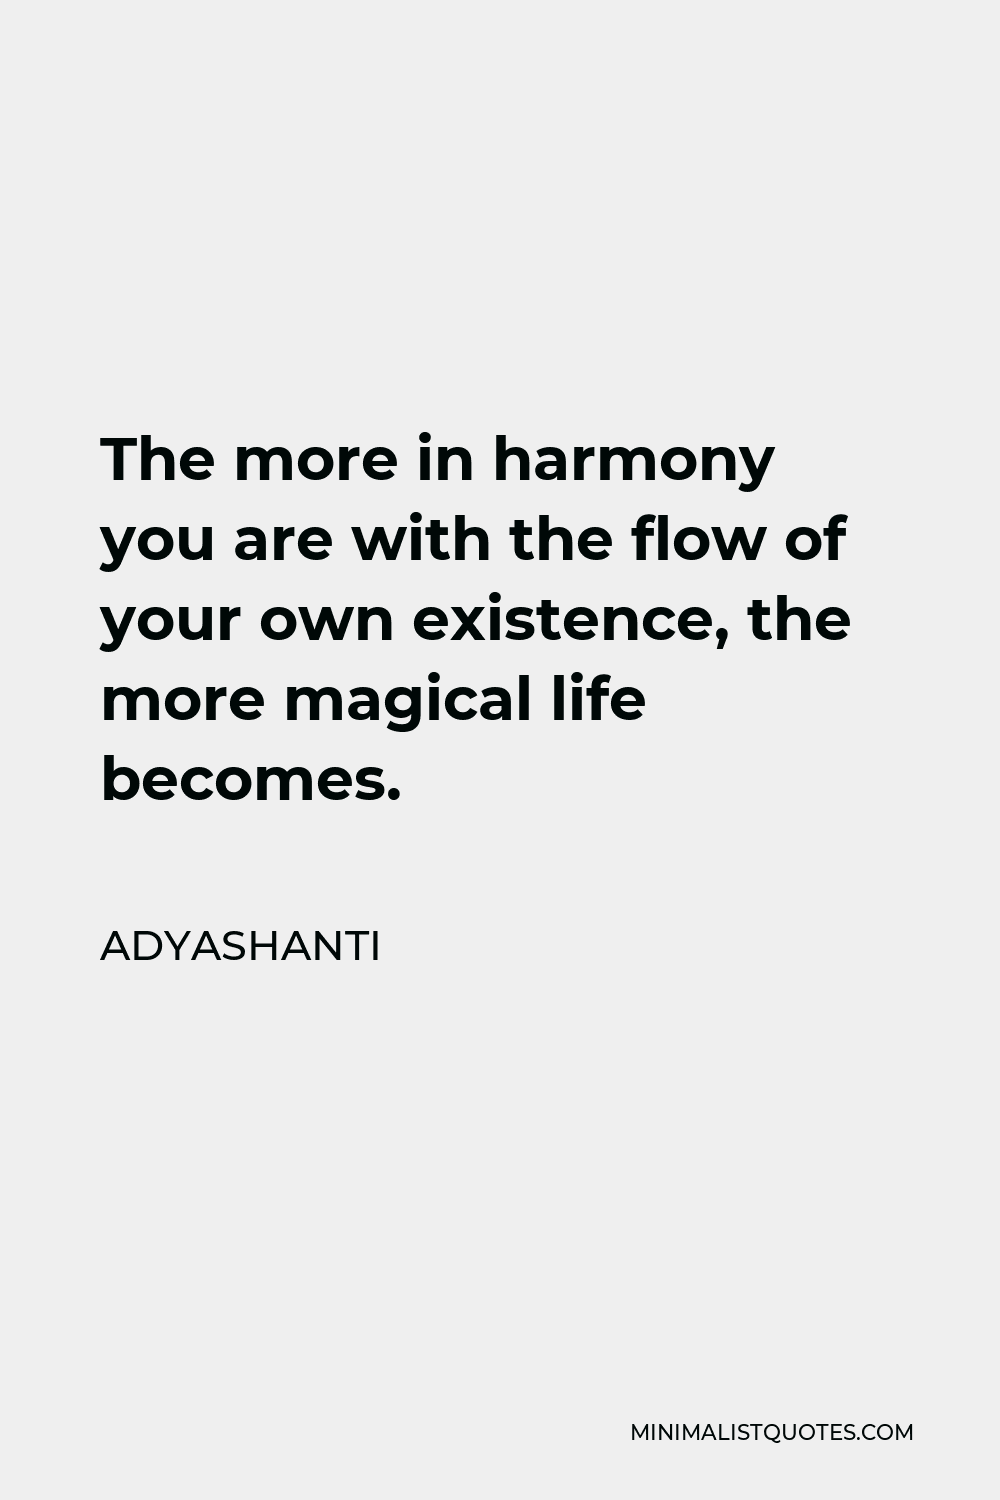 Adyashanti Quote - The more in harmony you are with the flow of your own existence, the more magical life becomes.